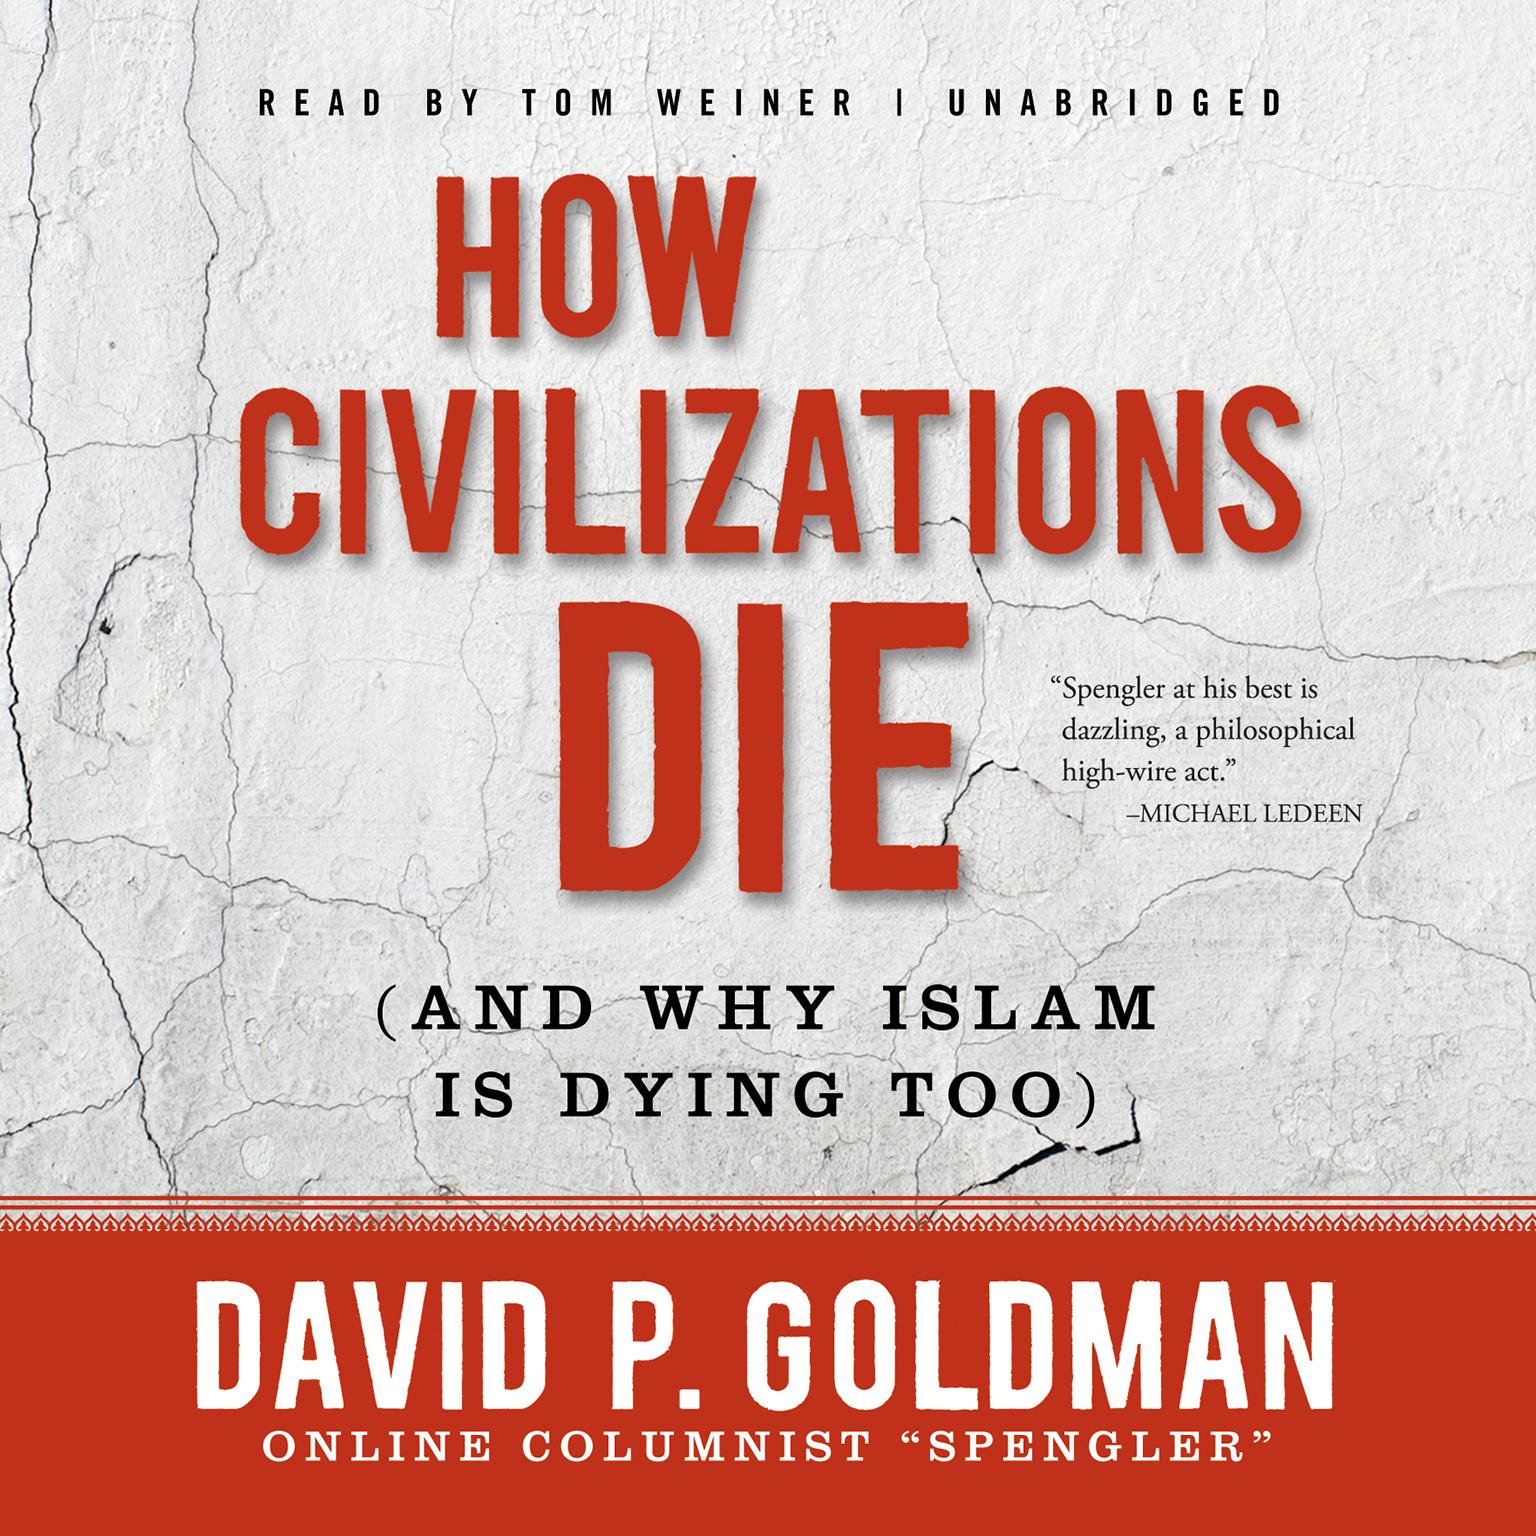 How Civilizations Die (and Why Islam Is Dying Too) Audiobook, by David Goldman